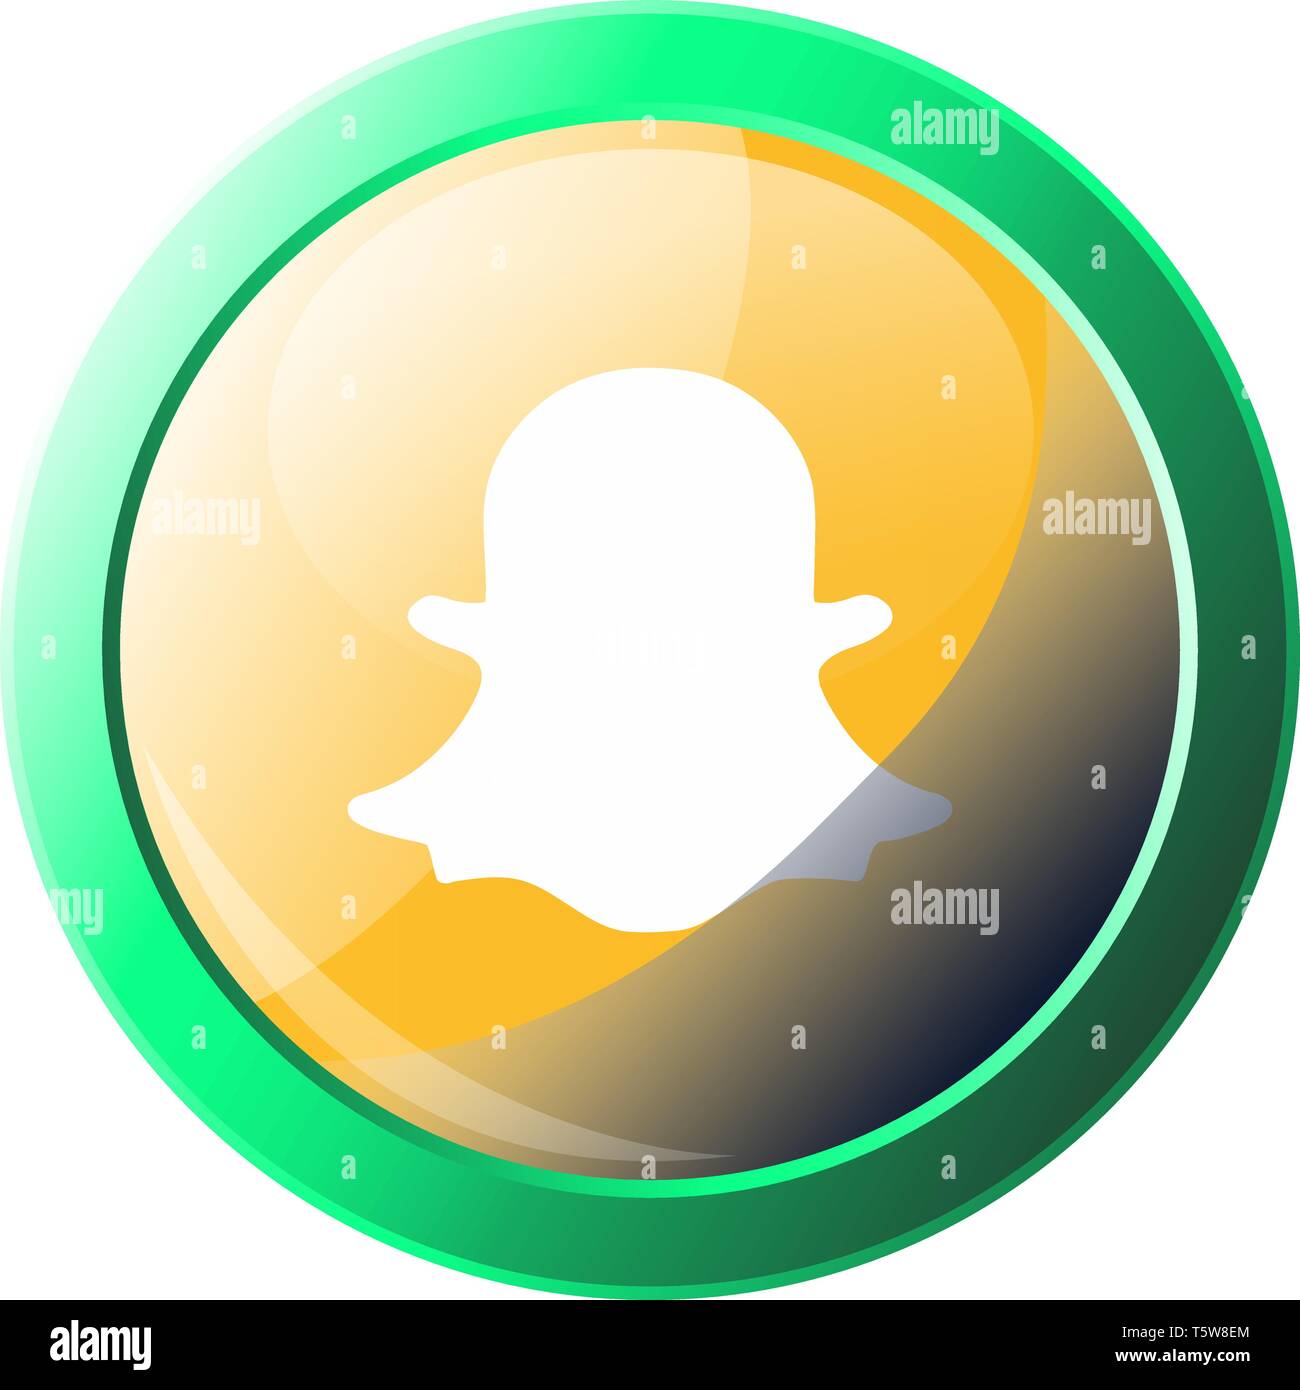 Snapchat logo with green round frame vector icon illustration on a white background Stock Vector